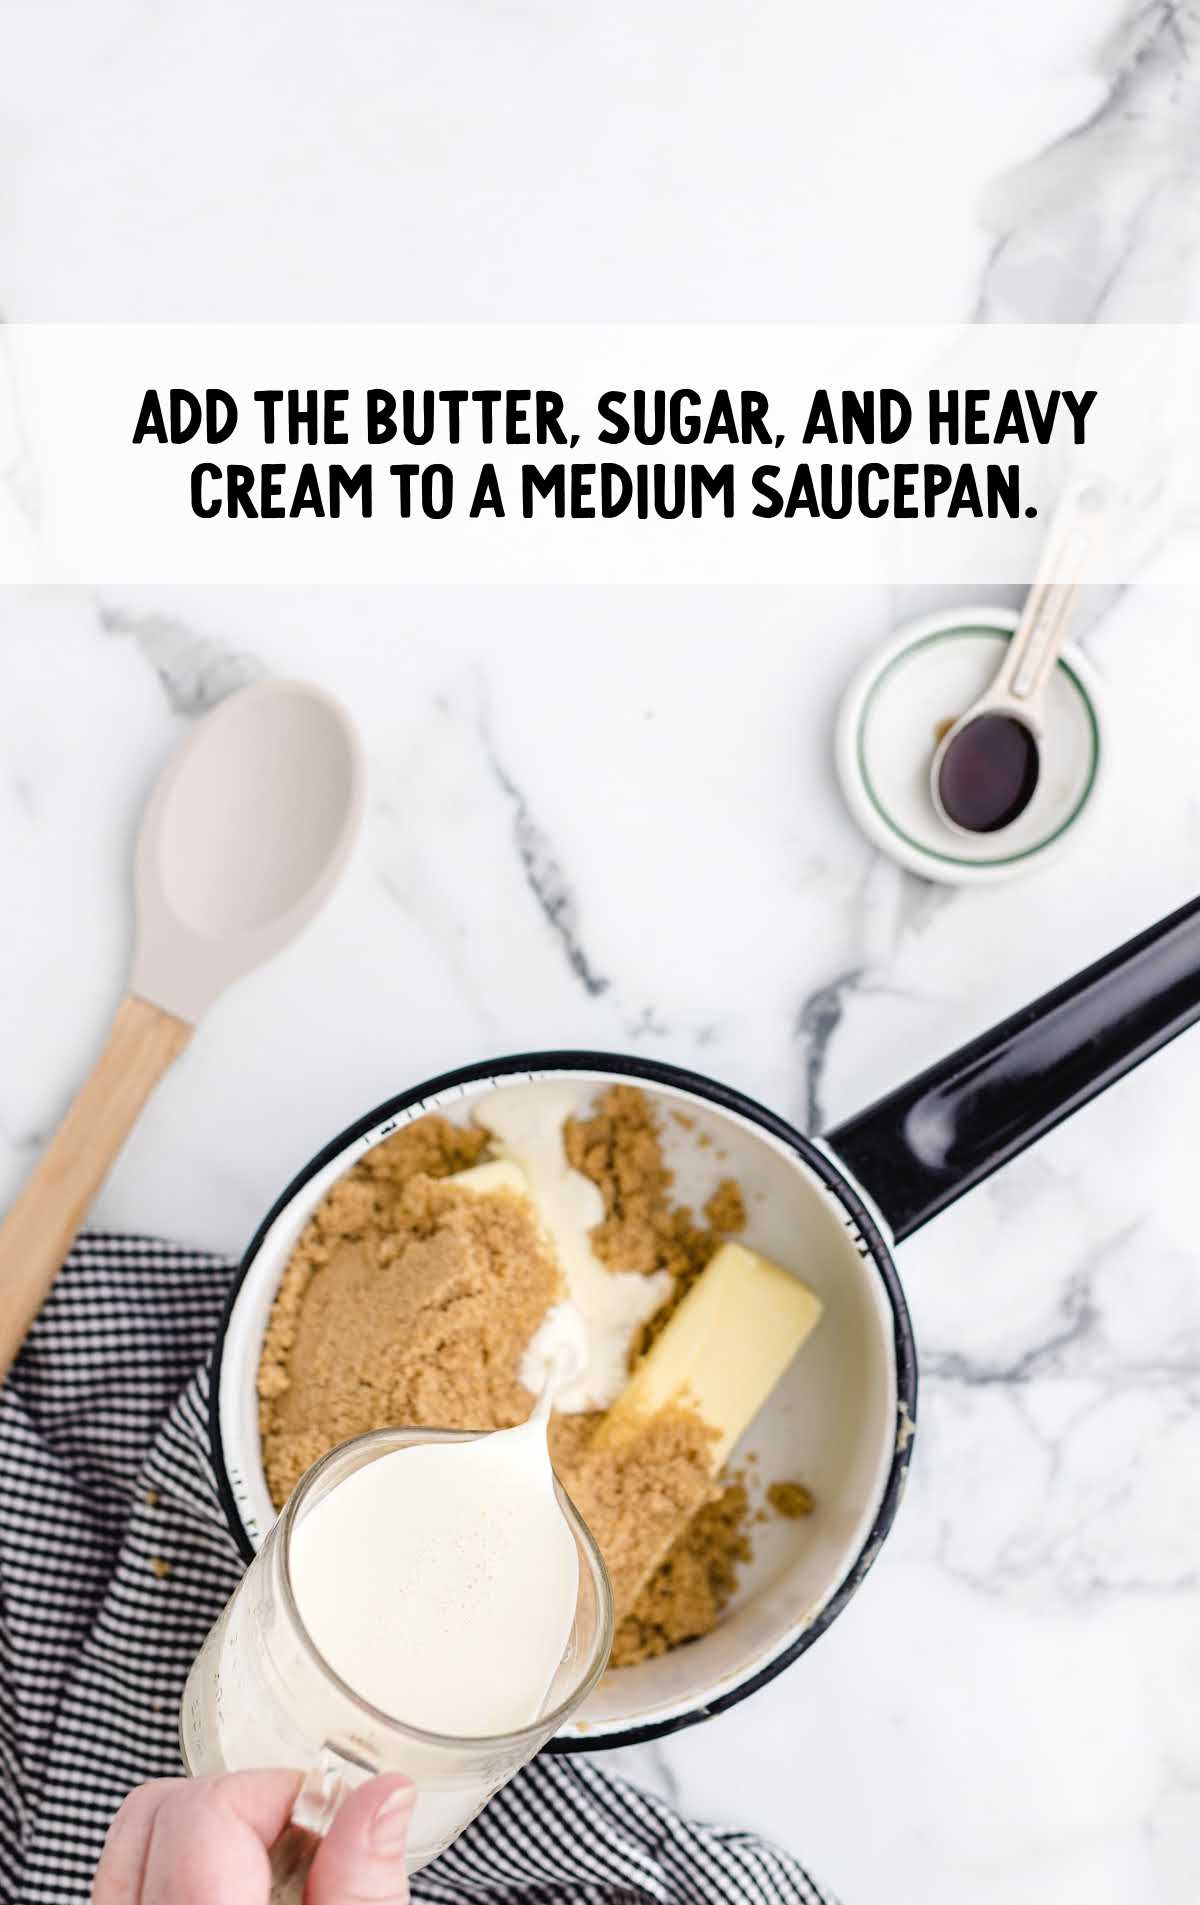 butter, sugar, and heavy cream added to a sauce pan